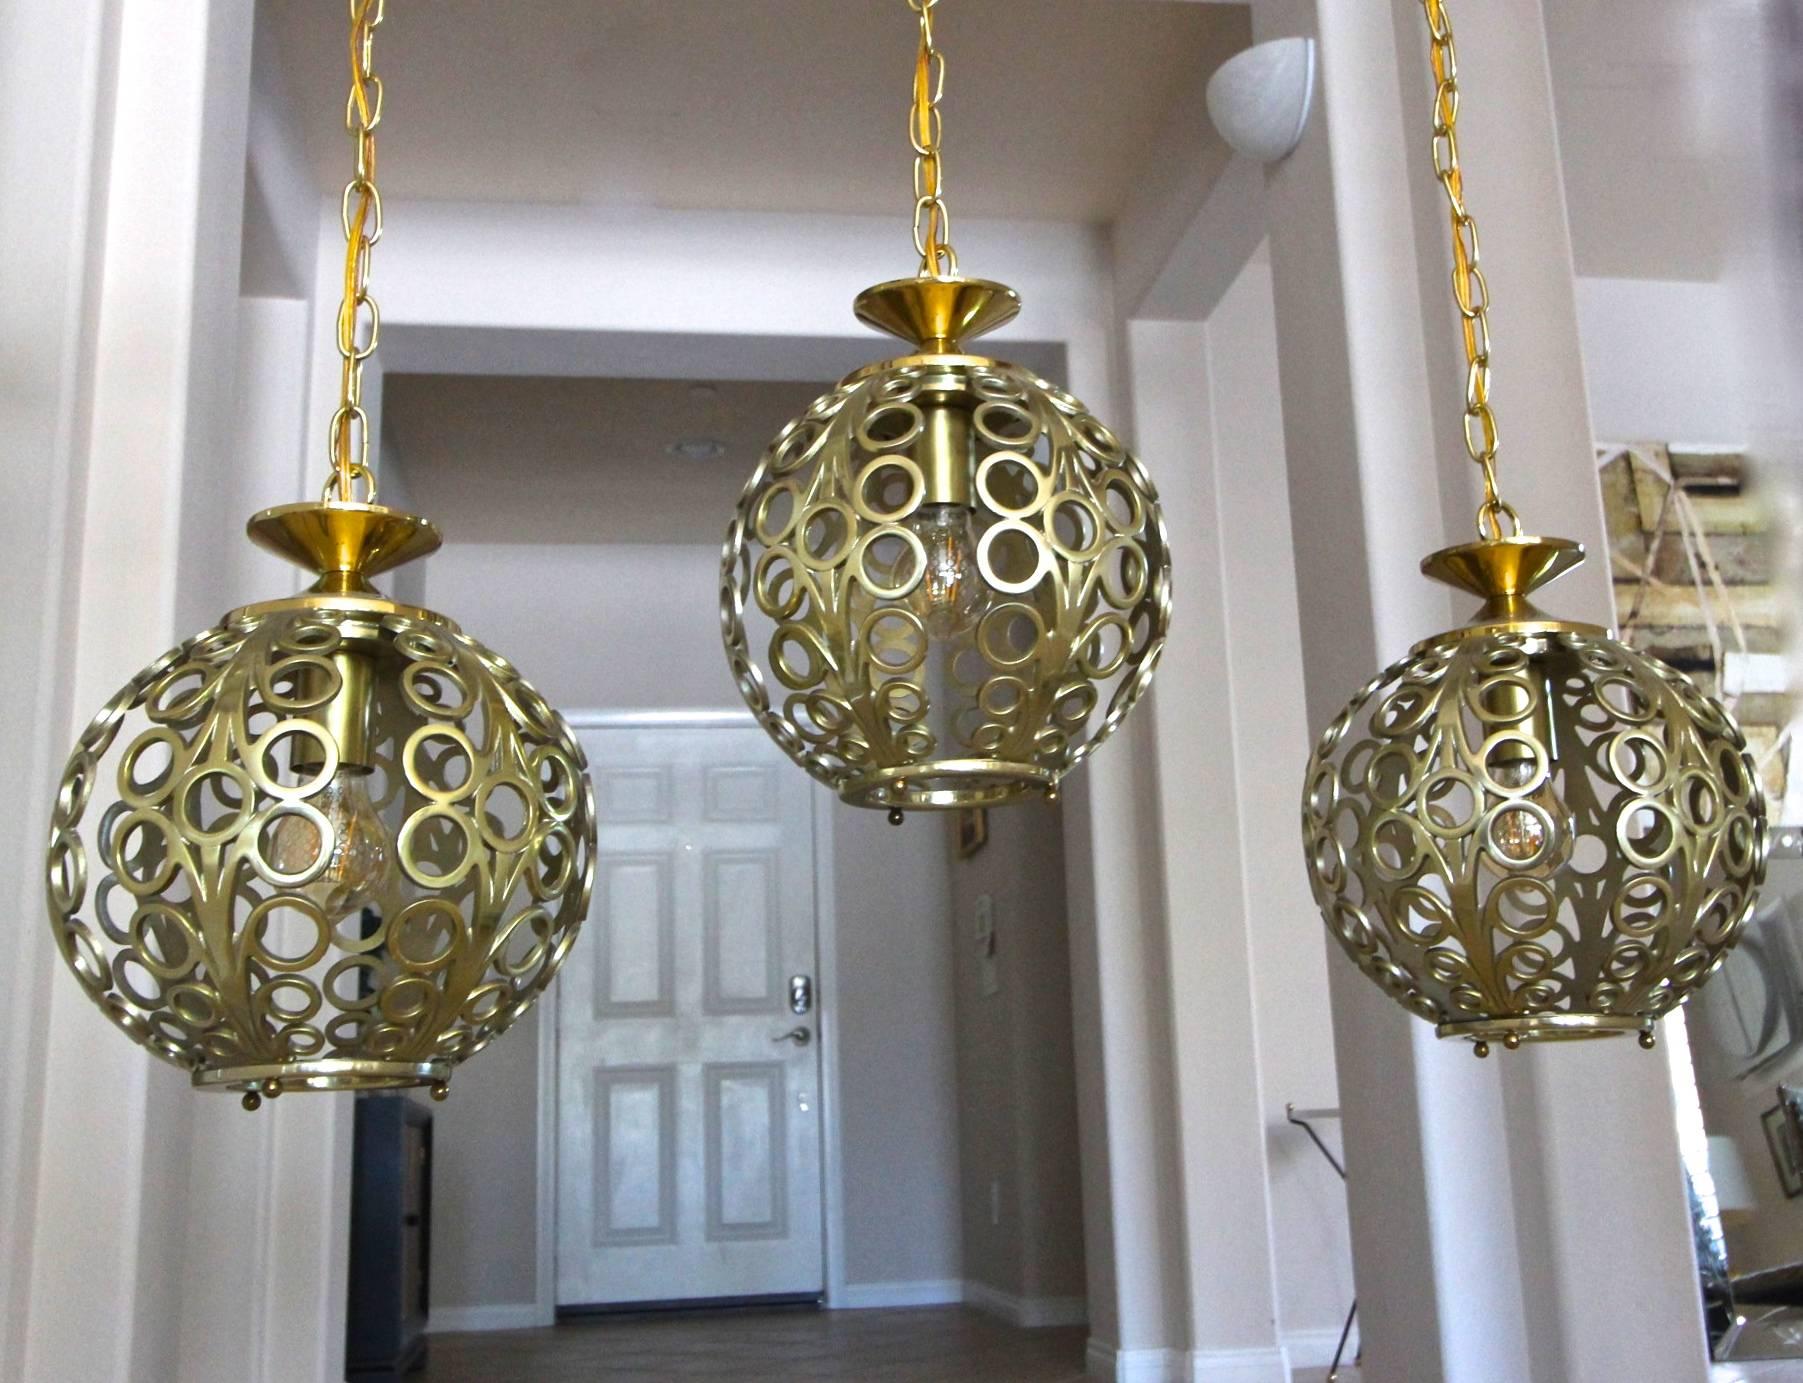 Trio of vintage pendants with circle motif in brass finish, each hangs separately. New light sockets, chain and ceiling caps. Overall length each pendant 53